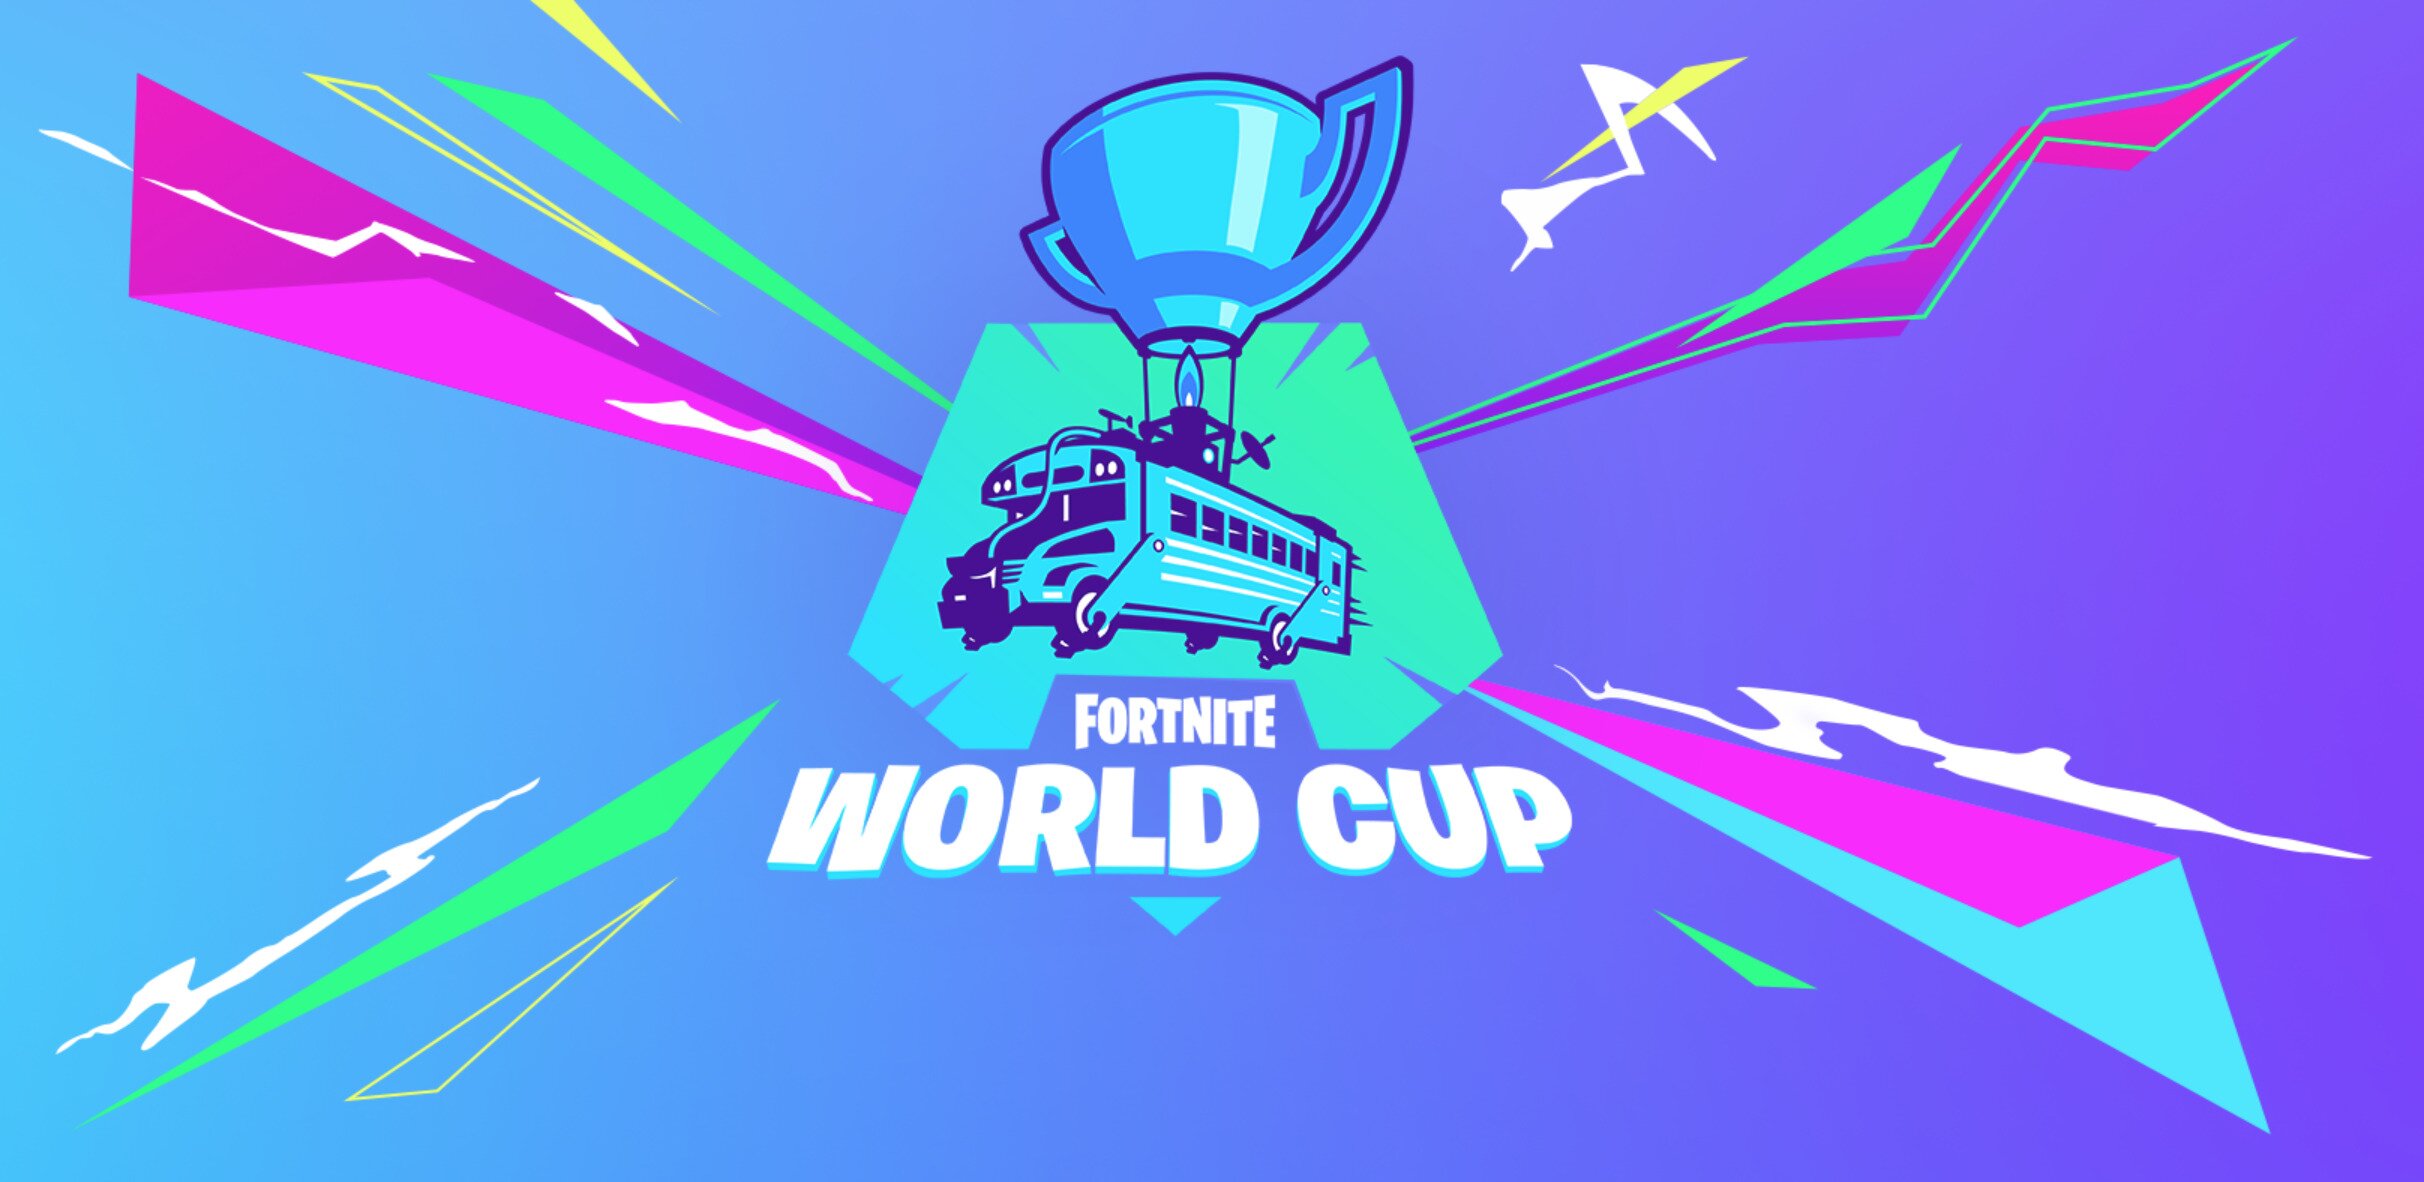 Epic Games has released more information about the Fortnite World Cup 2019. The total prize pool for the Duos and Solo events will be $30 million.